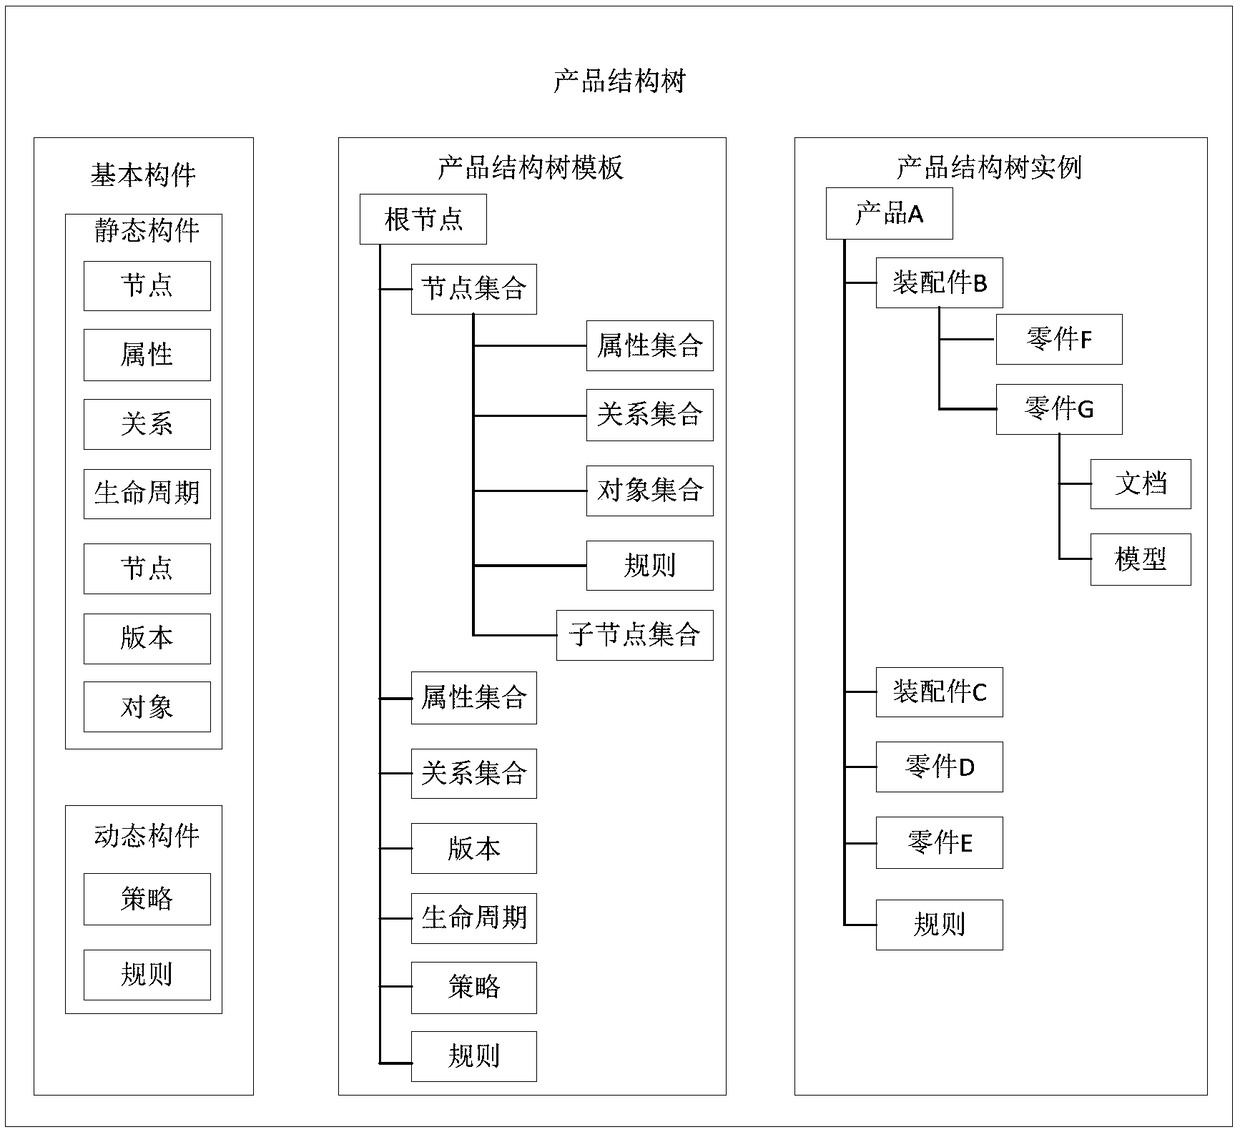 An implementation method of a component type custom product structure tree